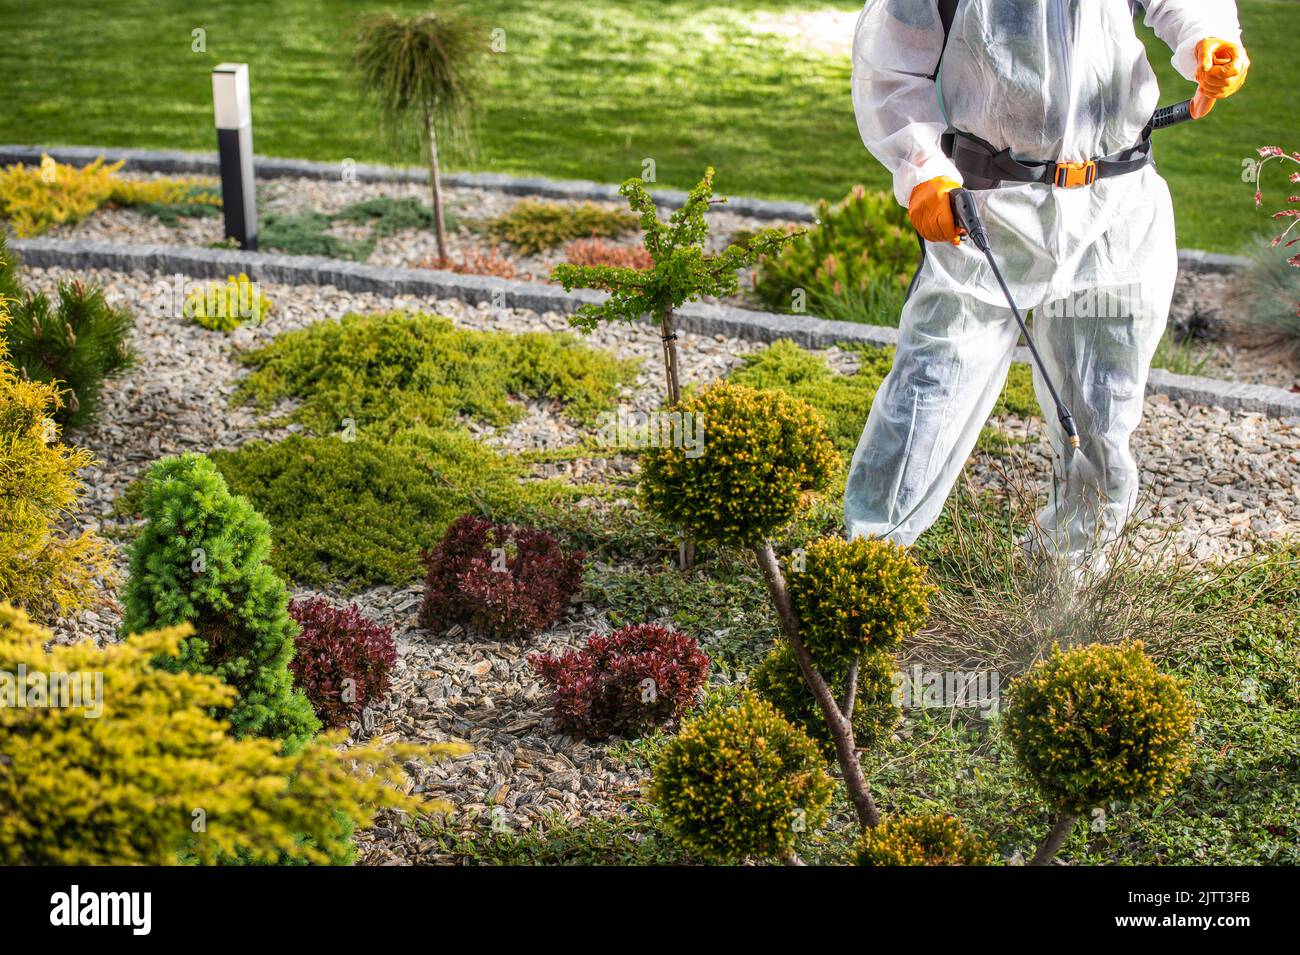 Professional Gardener in Protective Coverall and Gloves Spraying Pesticides on Different Shrubs and Bushed in His Client’s Landscaped Backyard Garden. Stock Photo